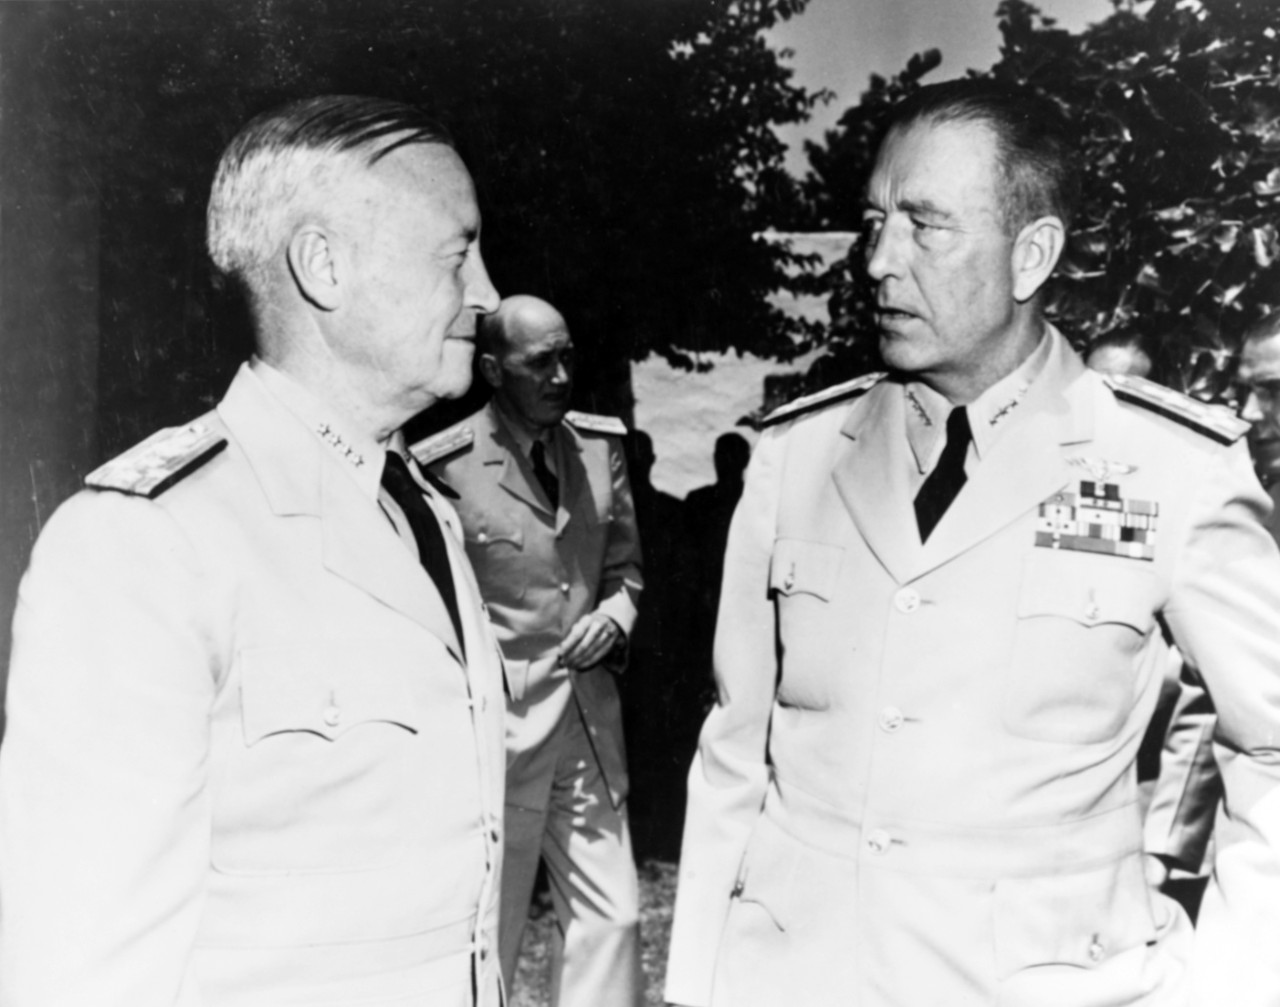 Photo #: 80-G-427790  Admiral Forrest P. Sherman